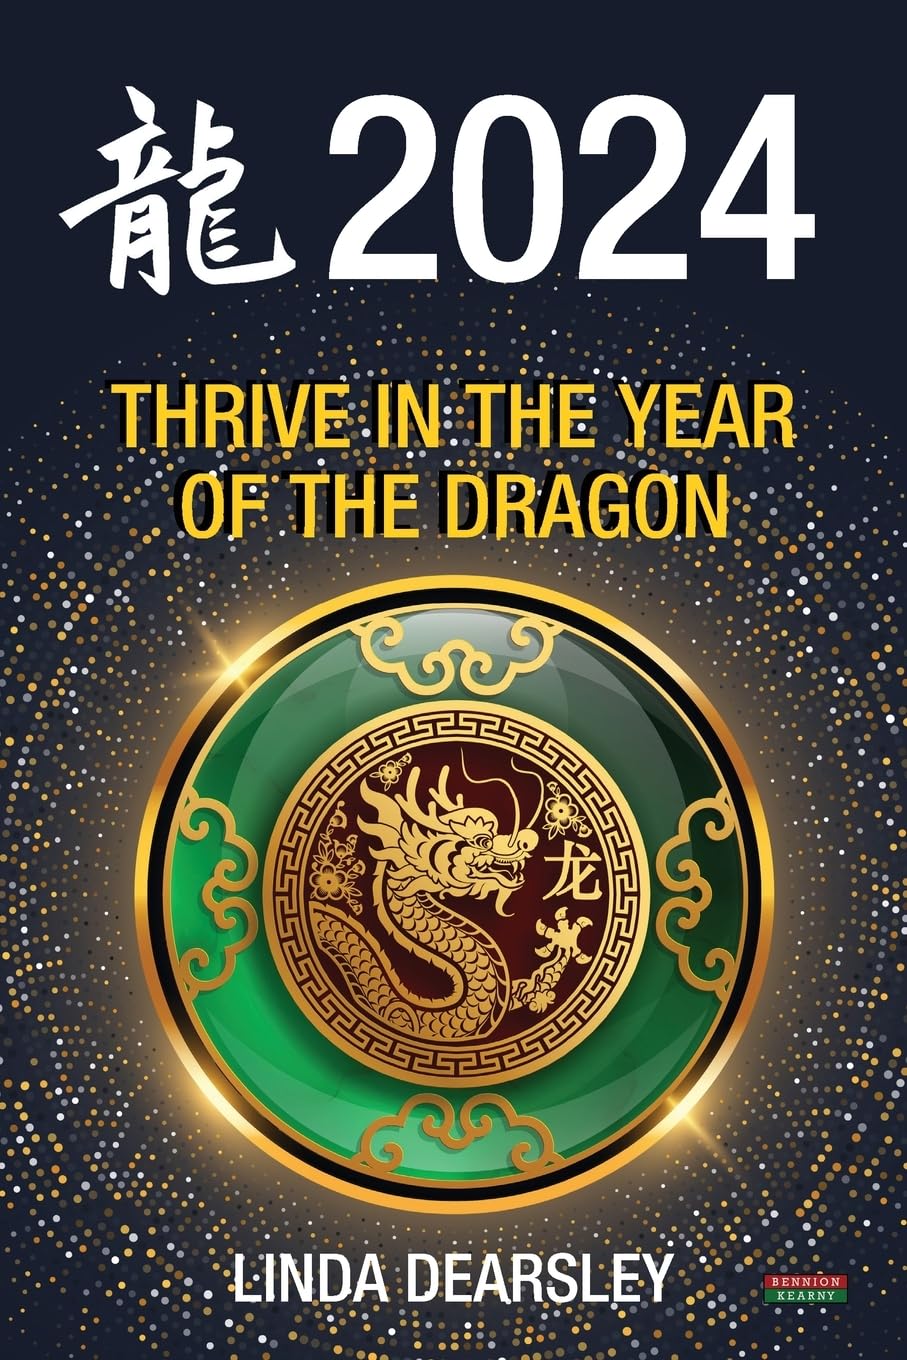 Thrive in the Year of the Dragon Chinese Zodiac Horoscope 2024